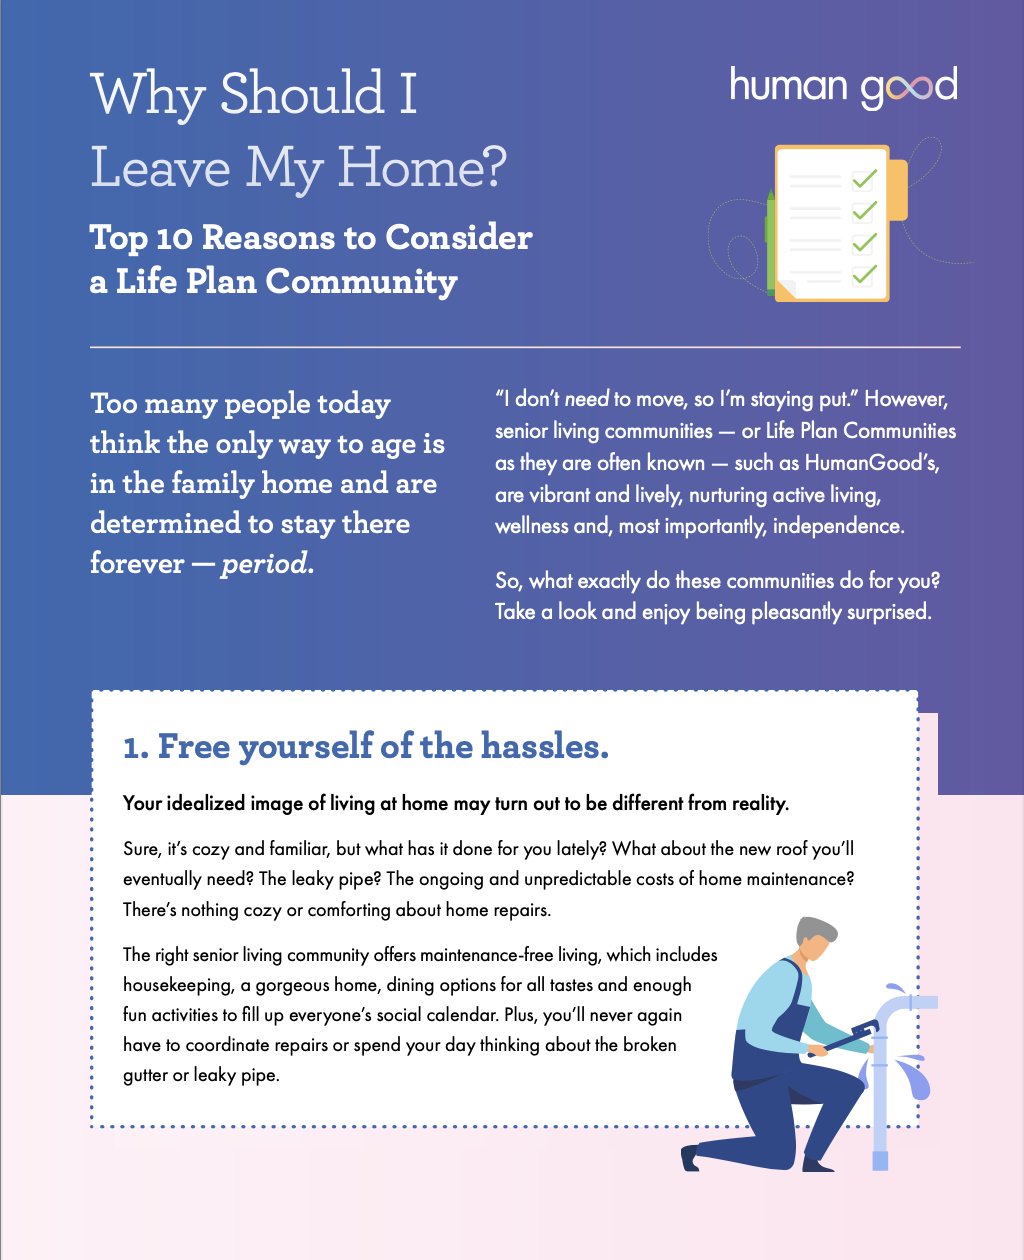 Why Should I Leave My Home? guide cover